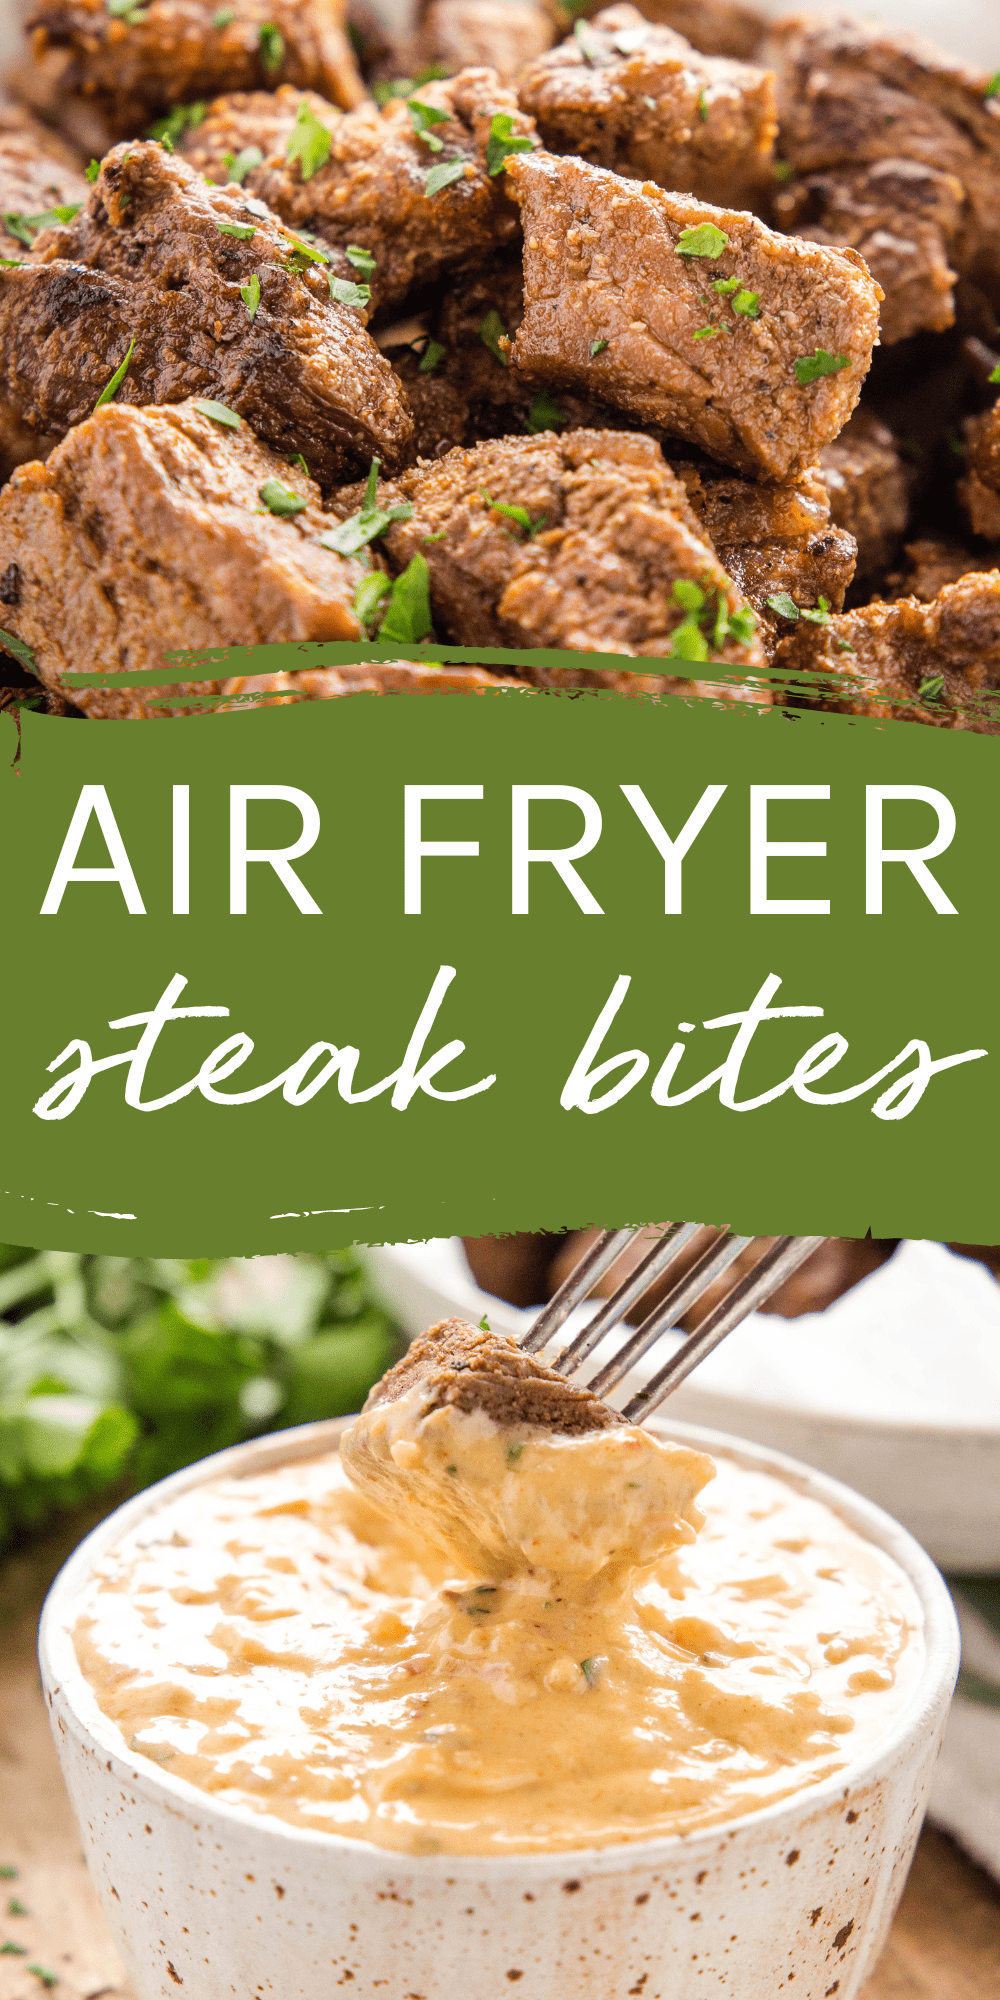 This Air Fryer Steak Bites recipe is the perfect snack, appetizer or main dish that's meaty and juicy and ready in 10 minutes! Recipe from thebusybaker.ca! #steakbites #garlicsteakbites #airfryersteakbites #steak #easyrecipe #easysteakrecipe #beef #appetizer #snack #steakrecipe via @busybakerblog